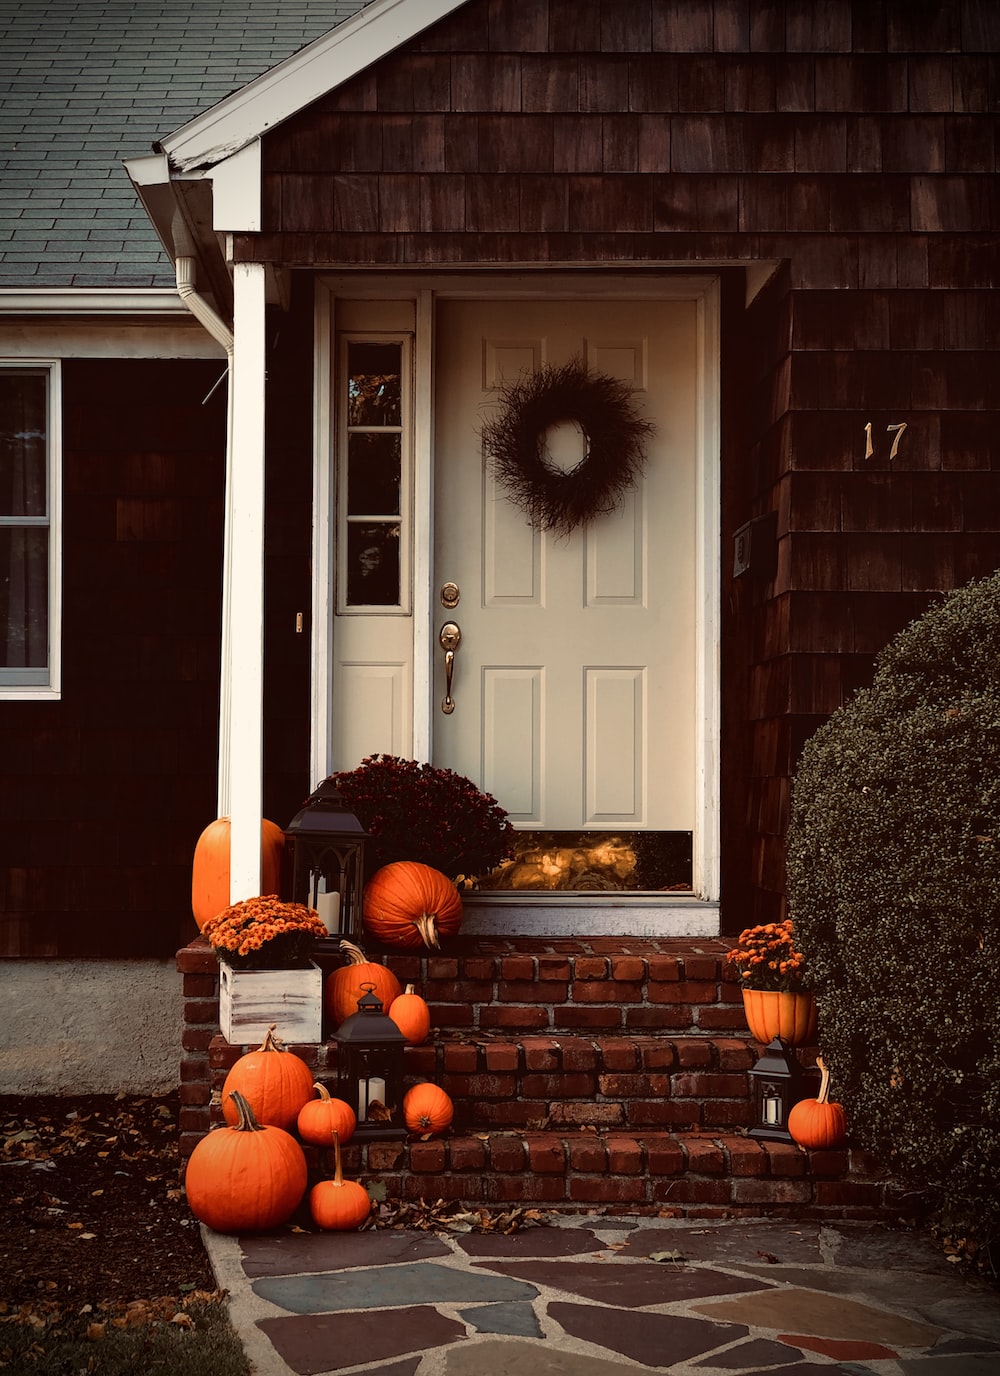 Fall Decor Picture. Download Free Image